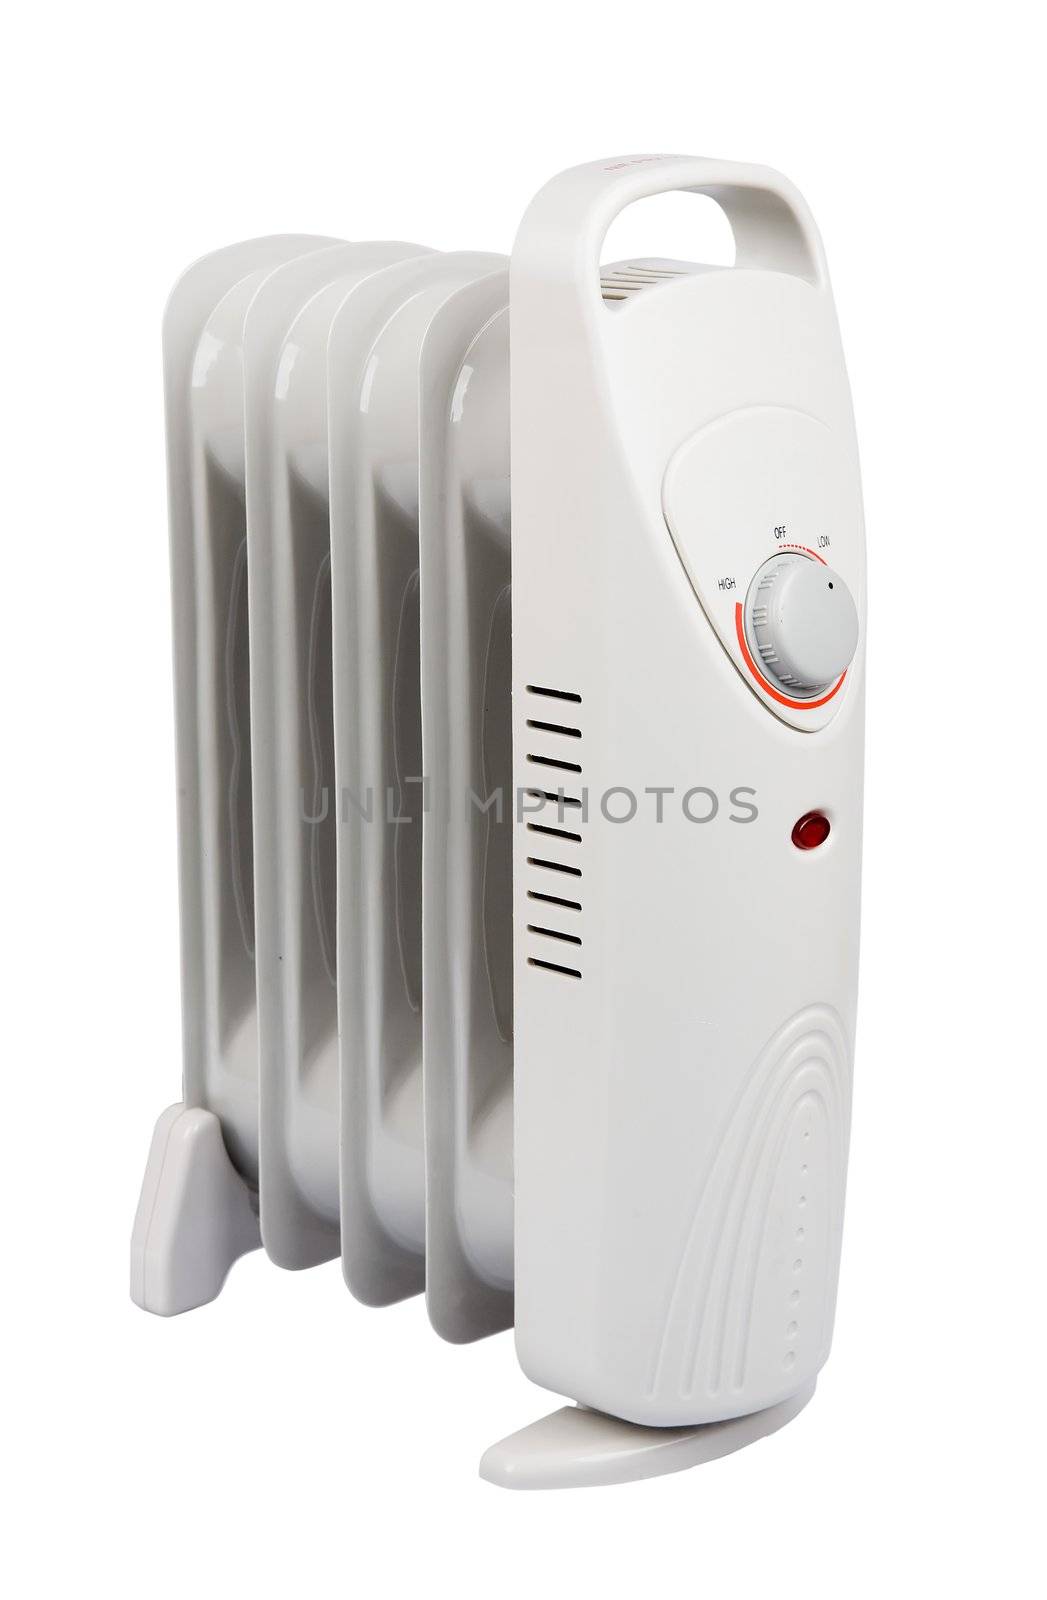 small electric heater with clipping path by furzyk73